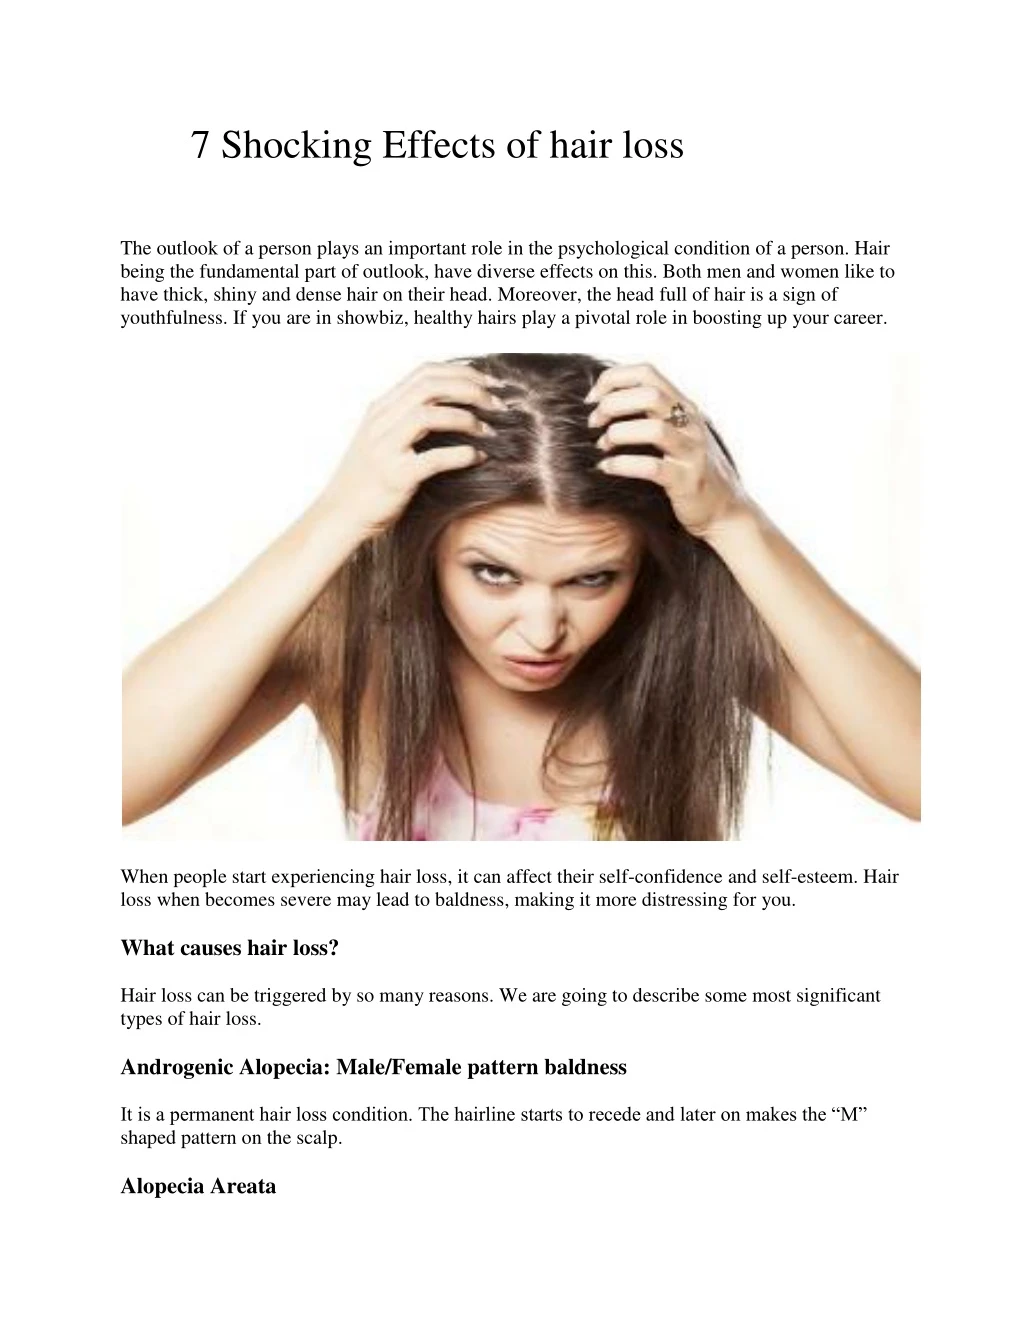 7 shocking effects of hair loss